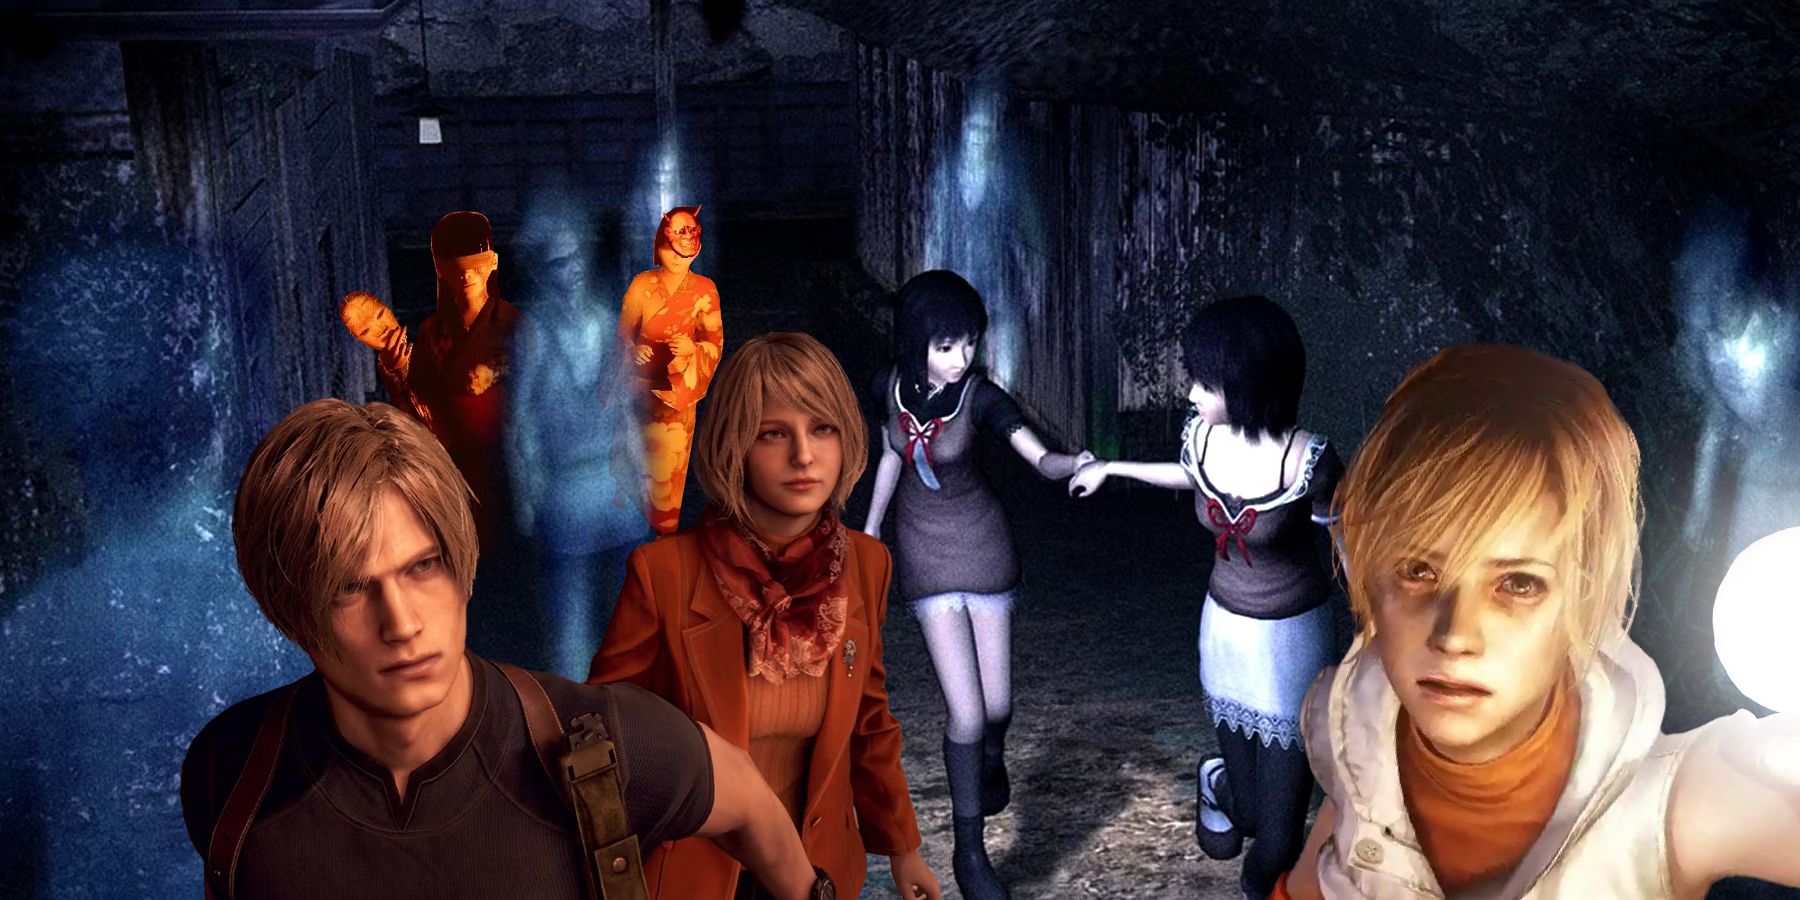 Fatal Frame 2: Crimson Butterfly, Resident Evil Village, Shadow Corridor, and Silent Hill 3 rank amongst our 18 Scariest Japanese Games To Never Play Alone